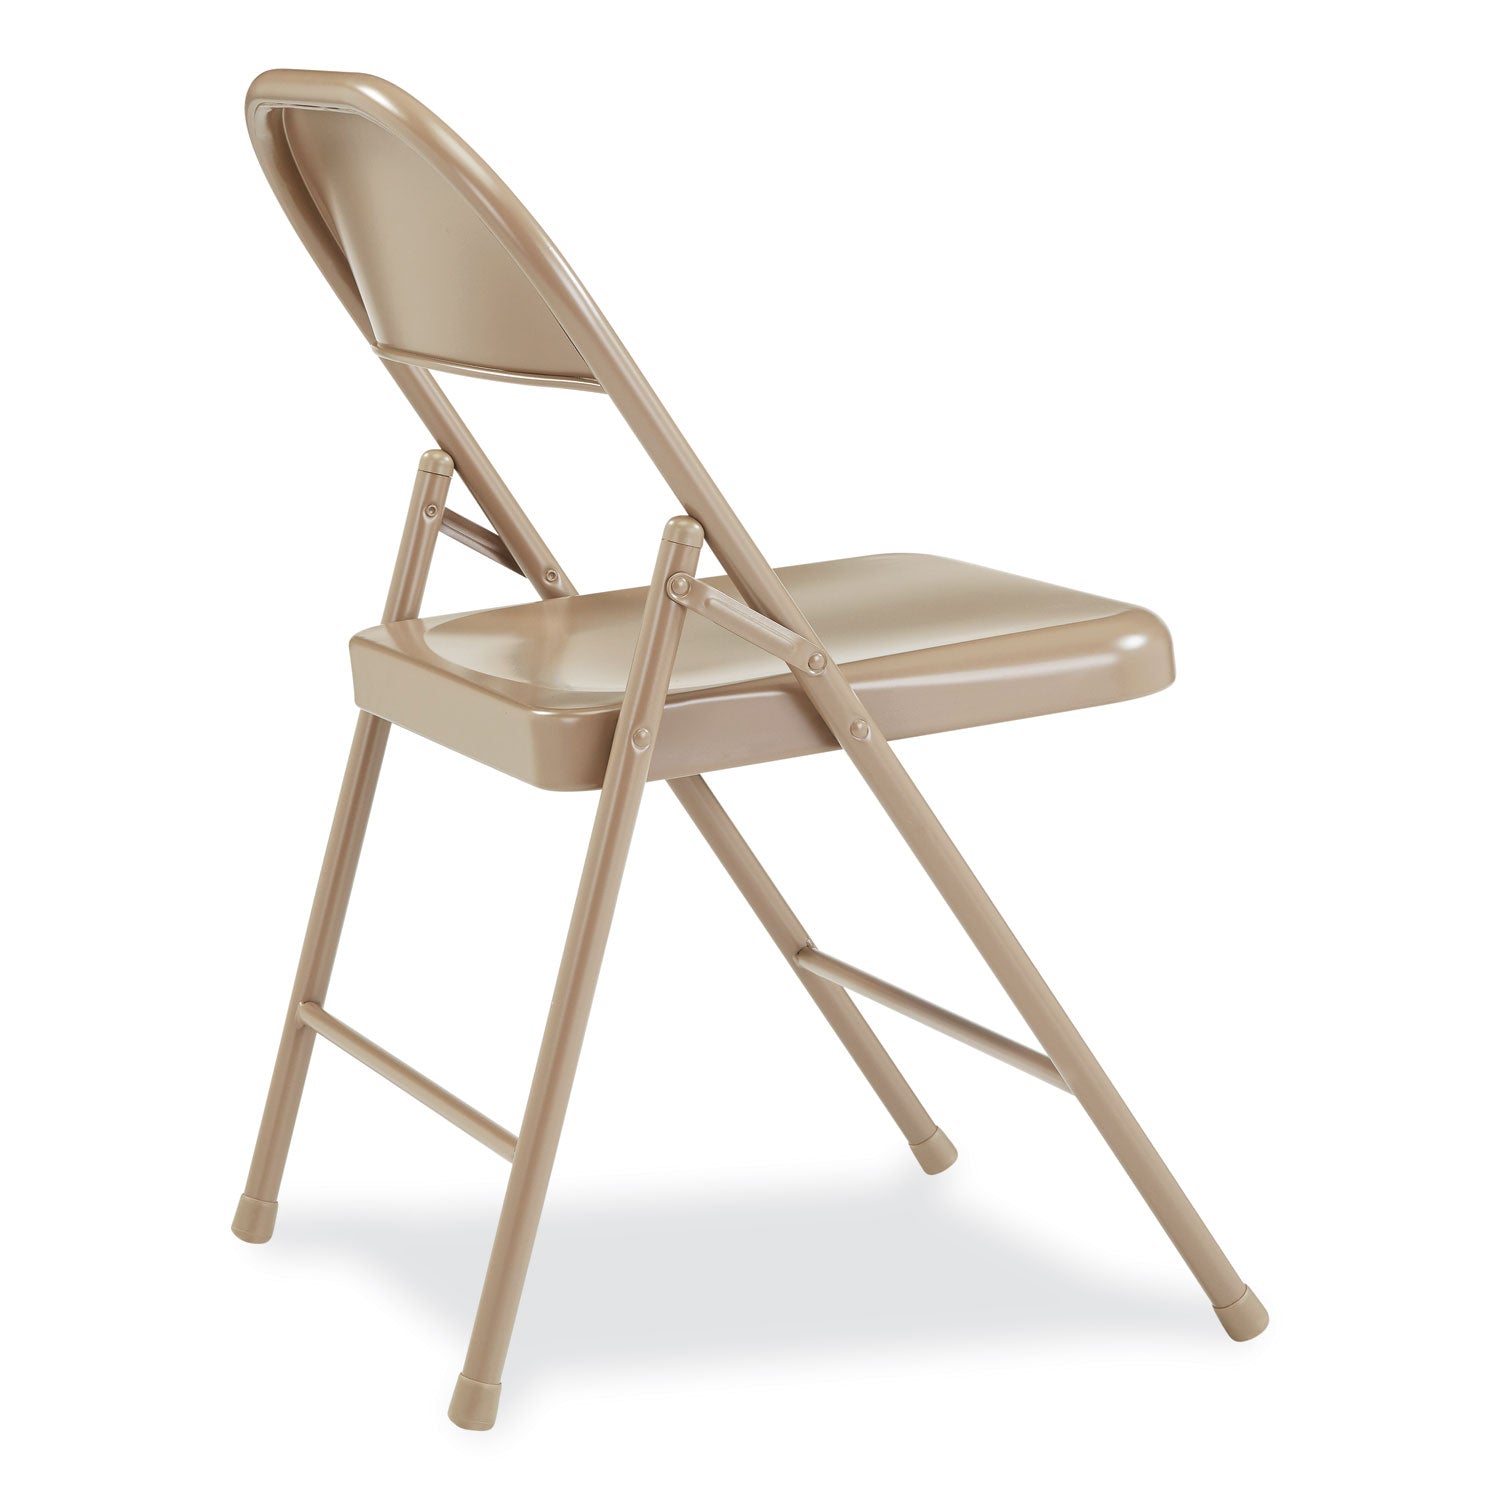 900-series-all-steel-folding-chair-supports-250lb-1775-seat-height-beige-seat-back-base-4-ctships-in-1-3-business-days_nps901 - 4